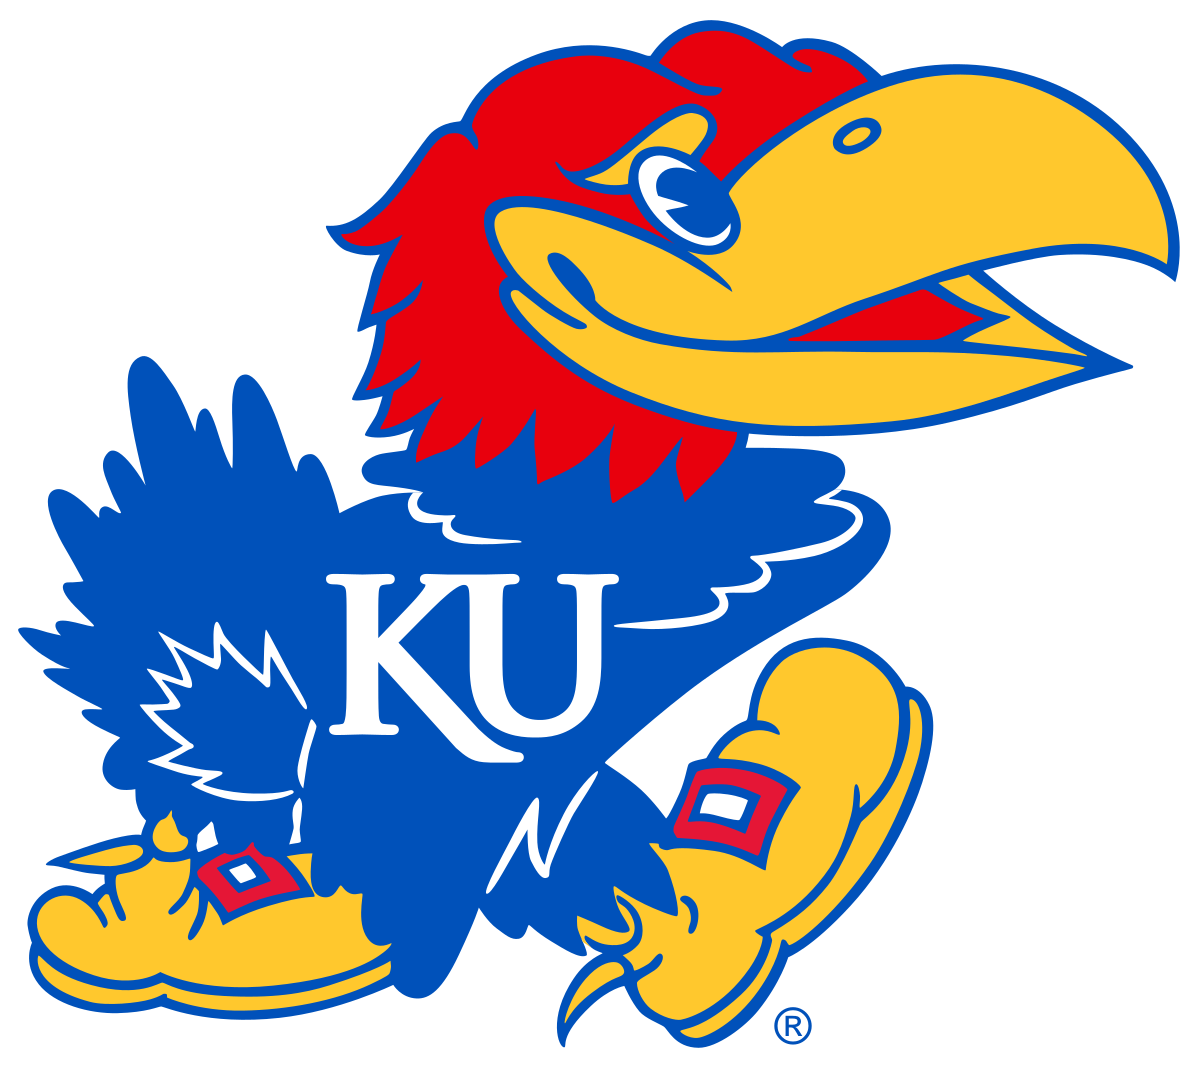 University of Kansas for the Missouri Wolverines Youth Tackle and Flag Football Club in Kansas City Missouri